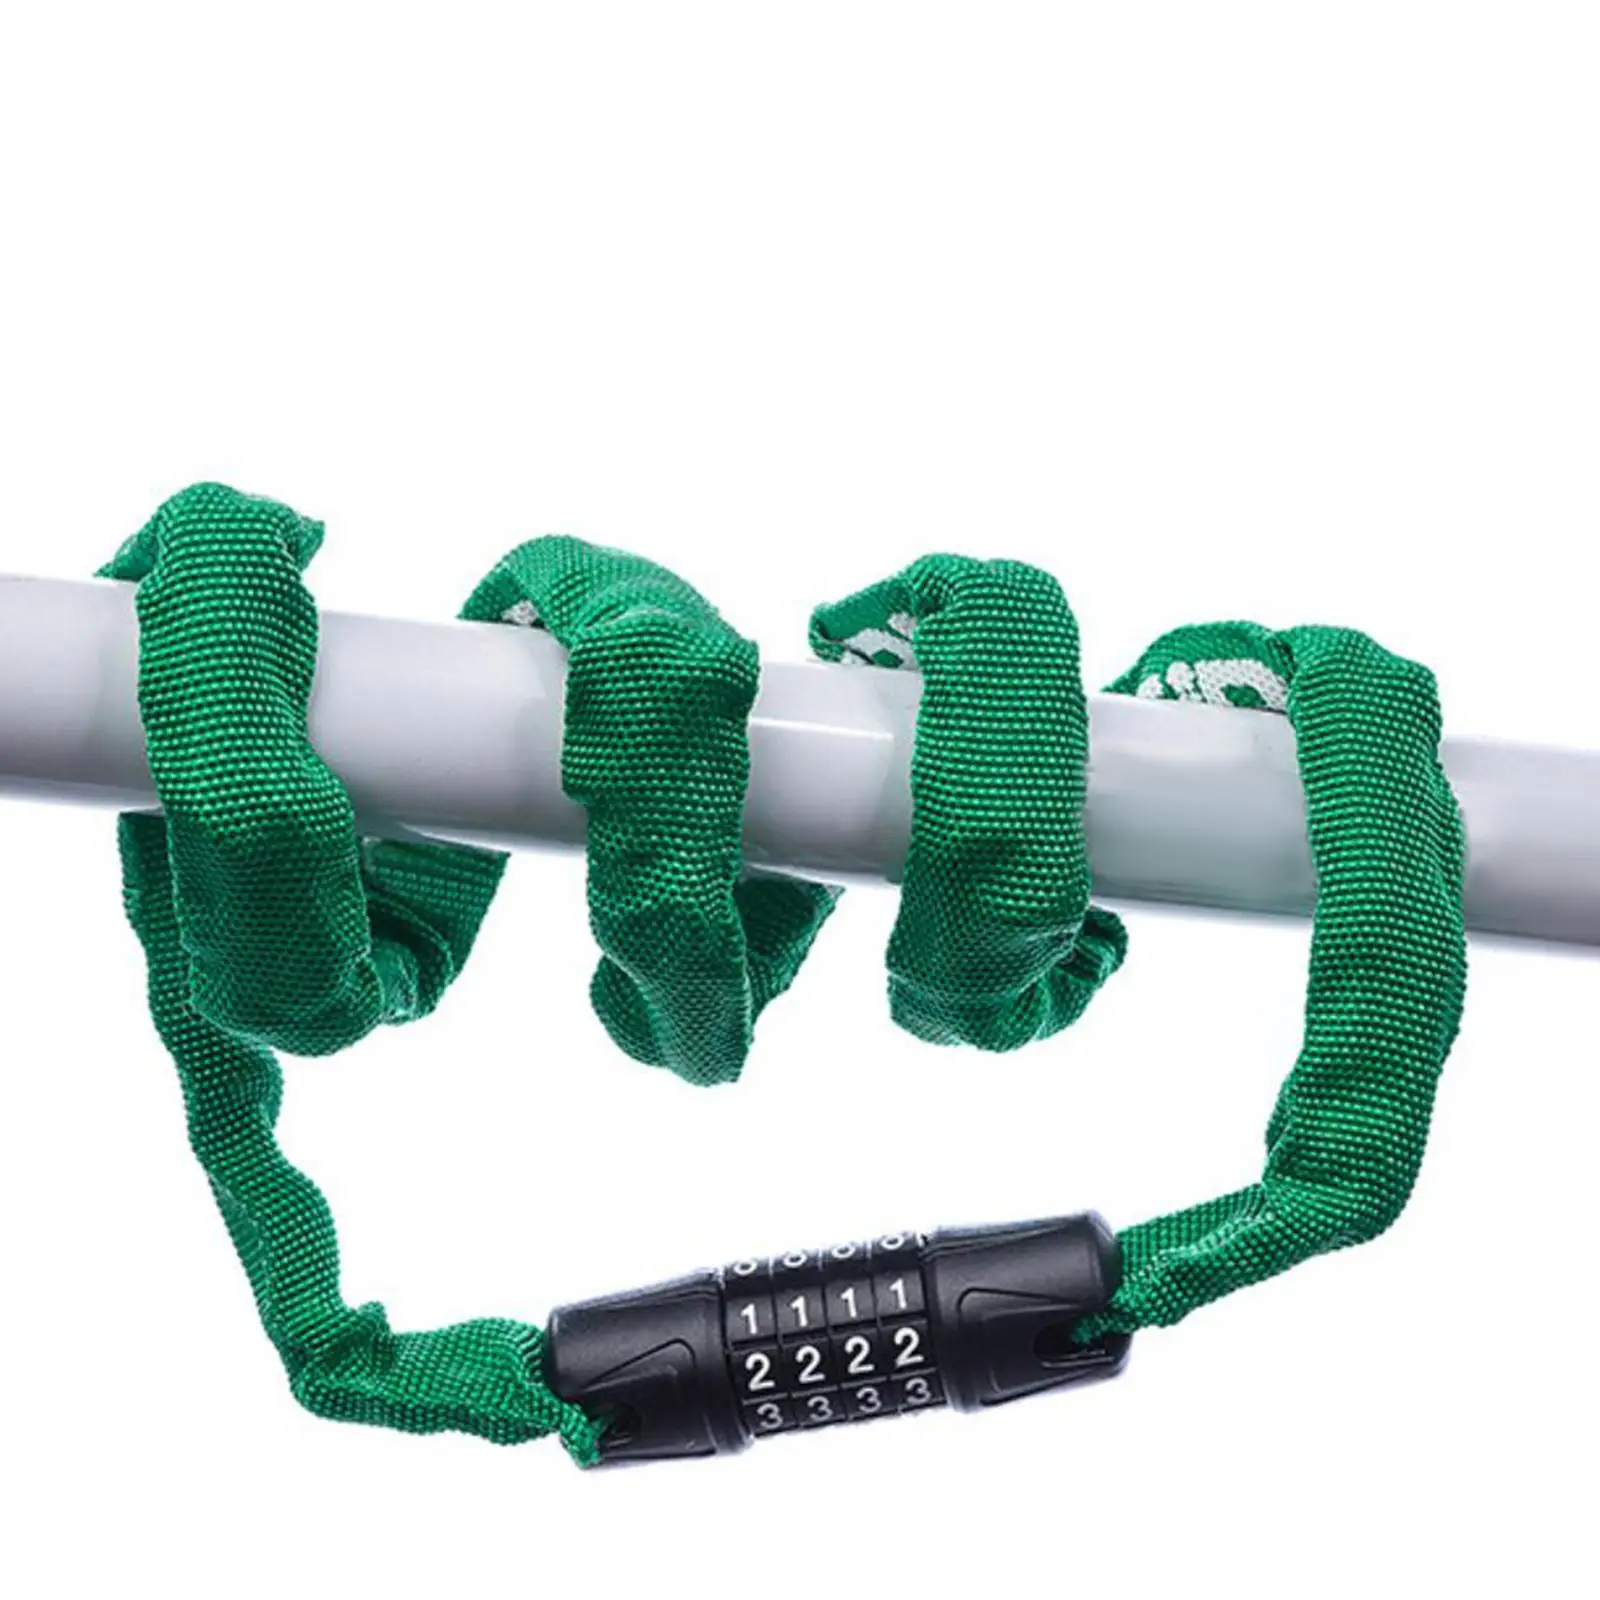 4 Digit Code Lock Safety Anti Theft Password Chain Lock MTB Road Chain Lock Outdoor Cycling Bicycle Accessories